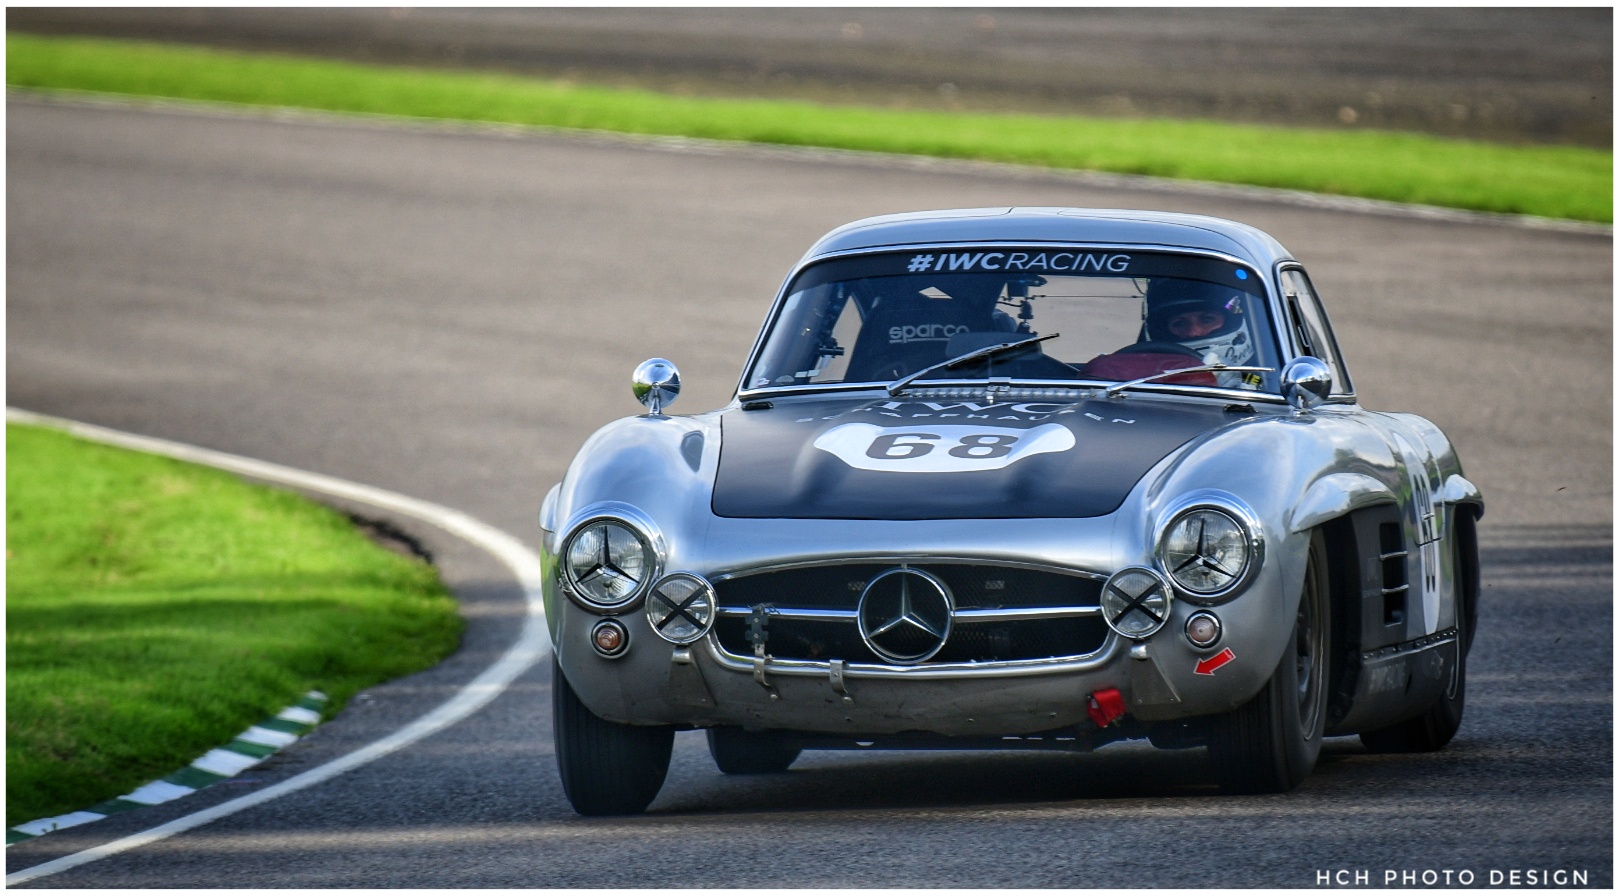 78th Members Meeting 2021 / Moss Trophy - Practice / Mercedes-Benz 300 SL "Gullwing"